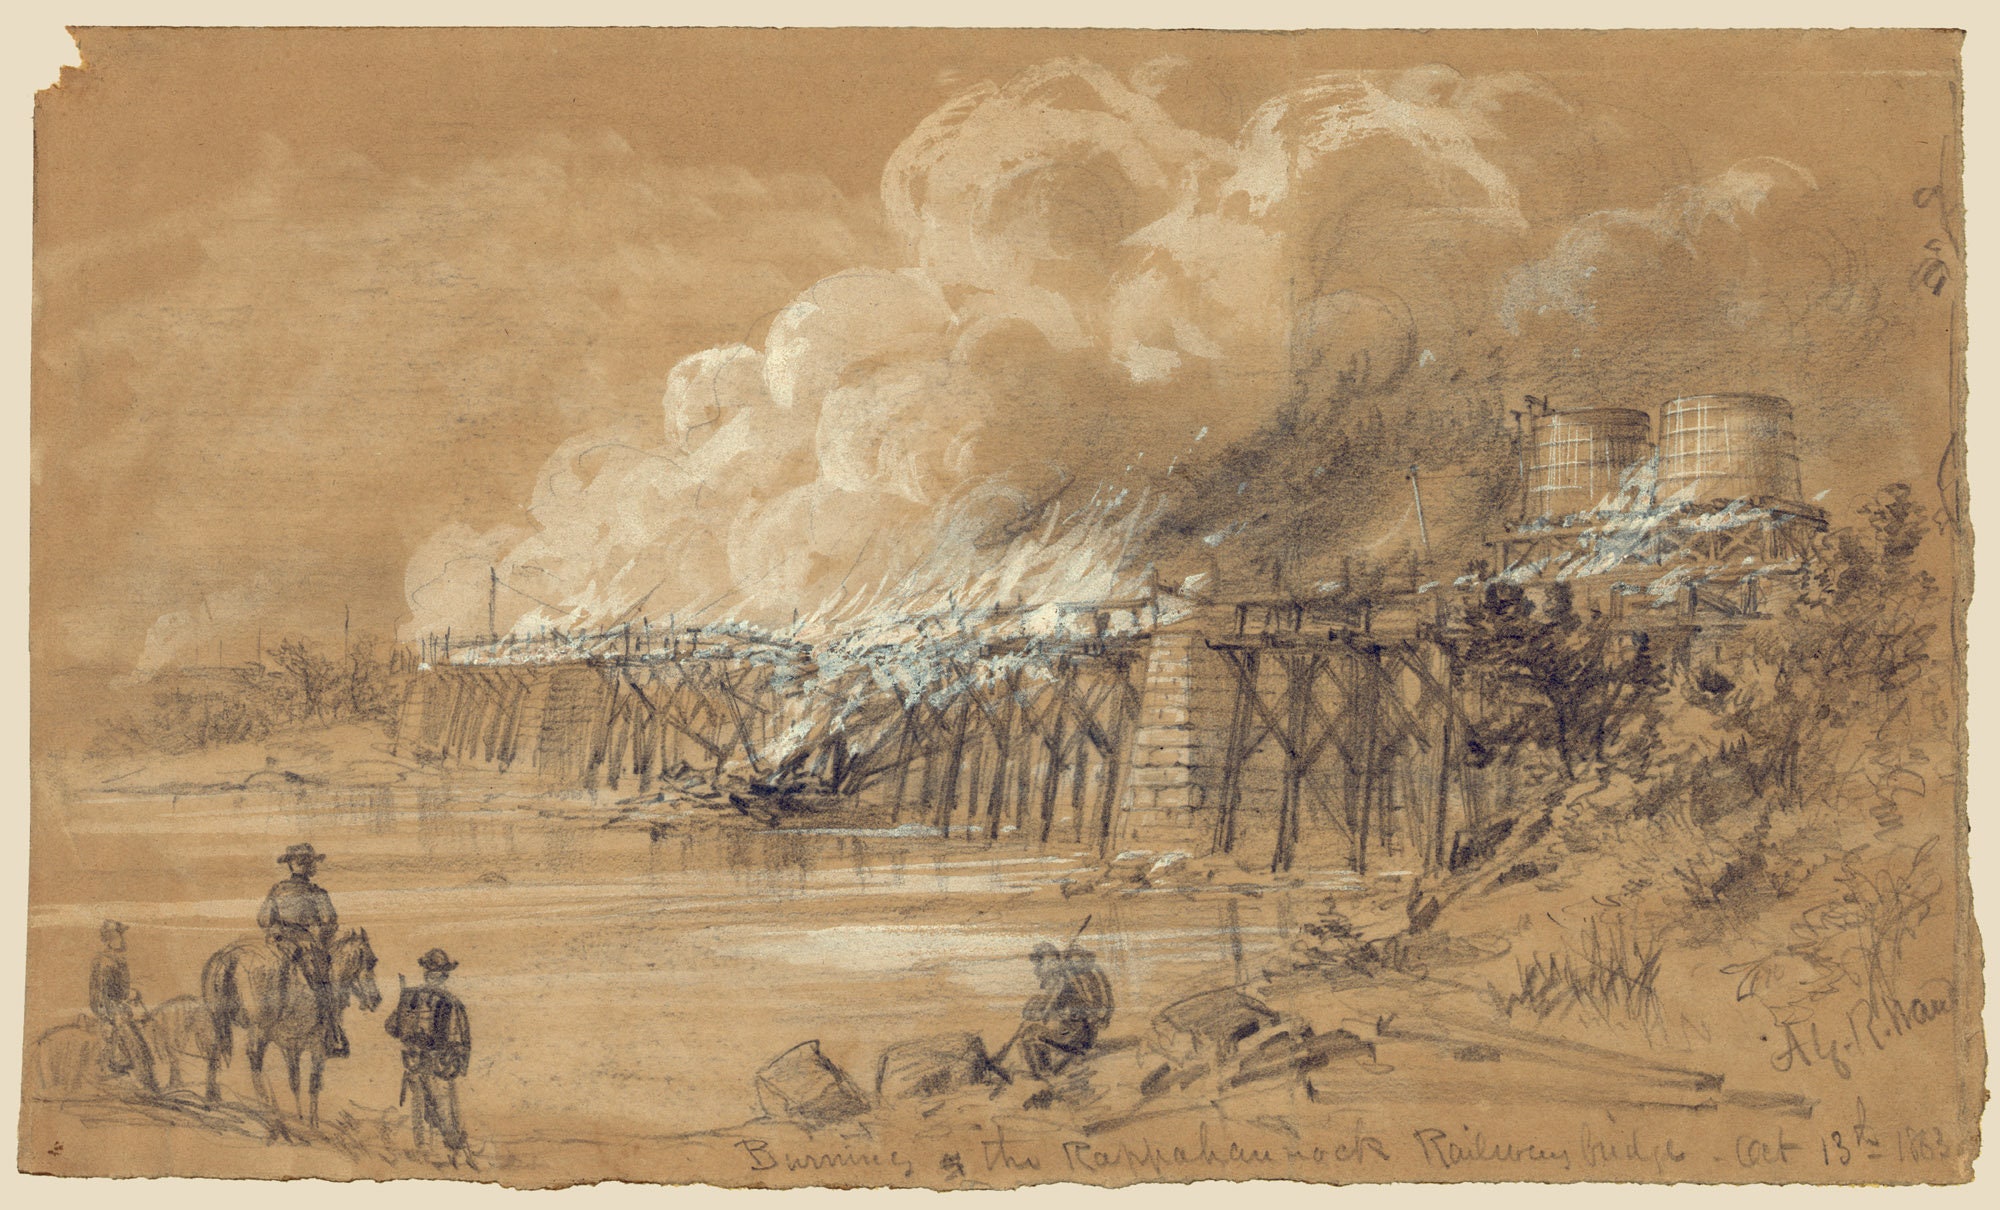 Images of America: the Civil War. Burning the Rappahannock